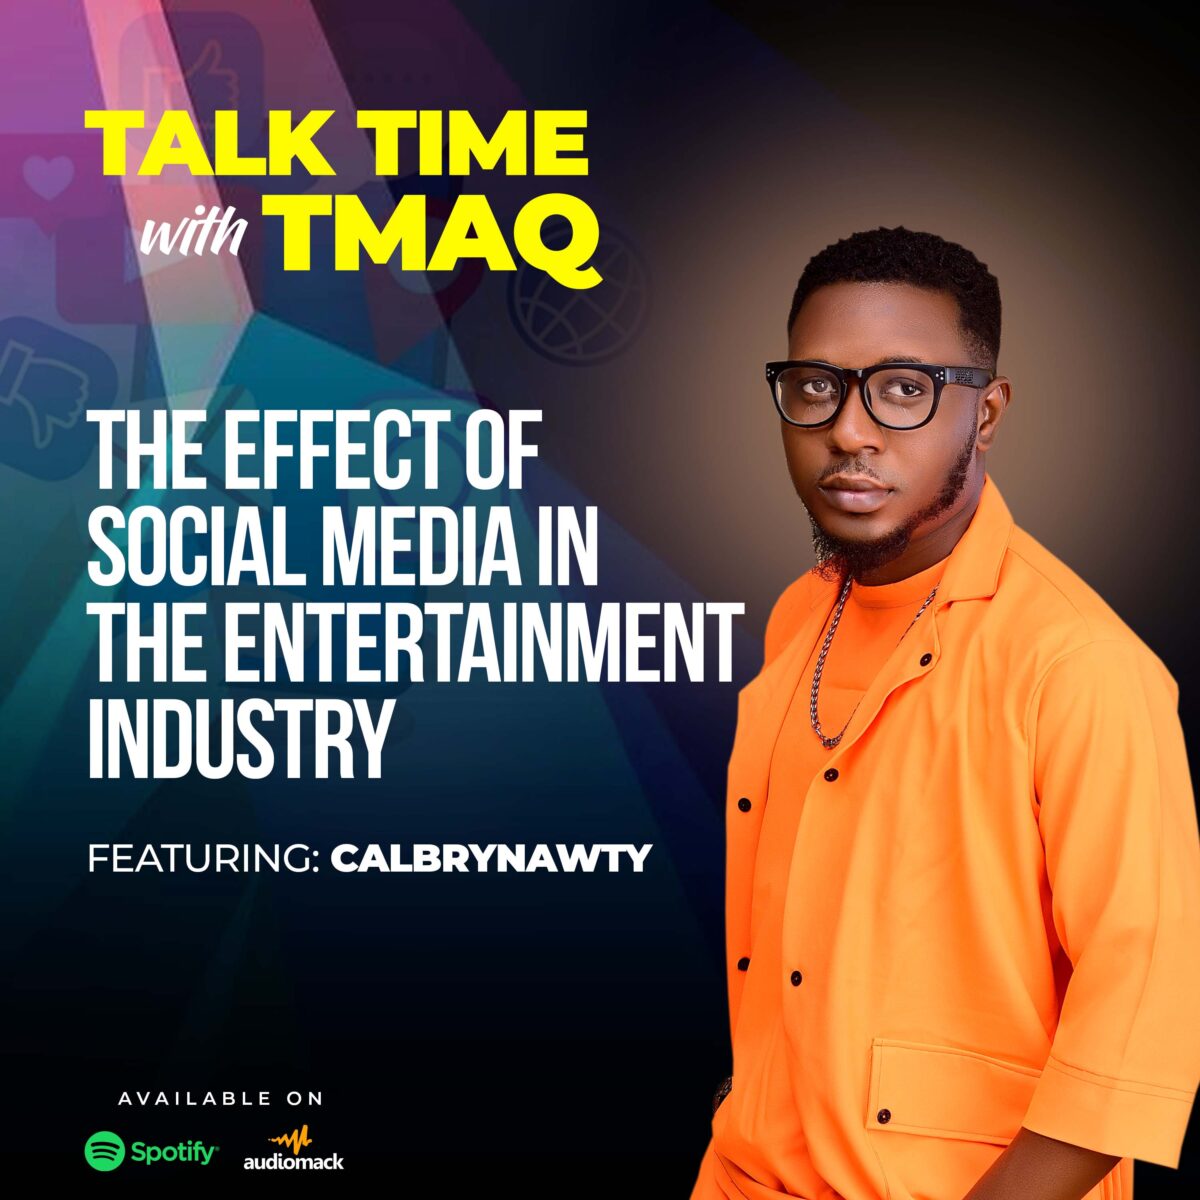 Talk Time with Tmaq: The effect of social media in the entertainment industry featuring calbrynawty